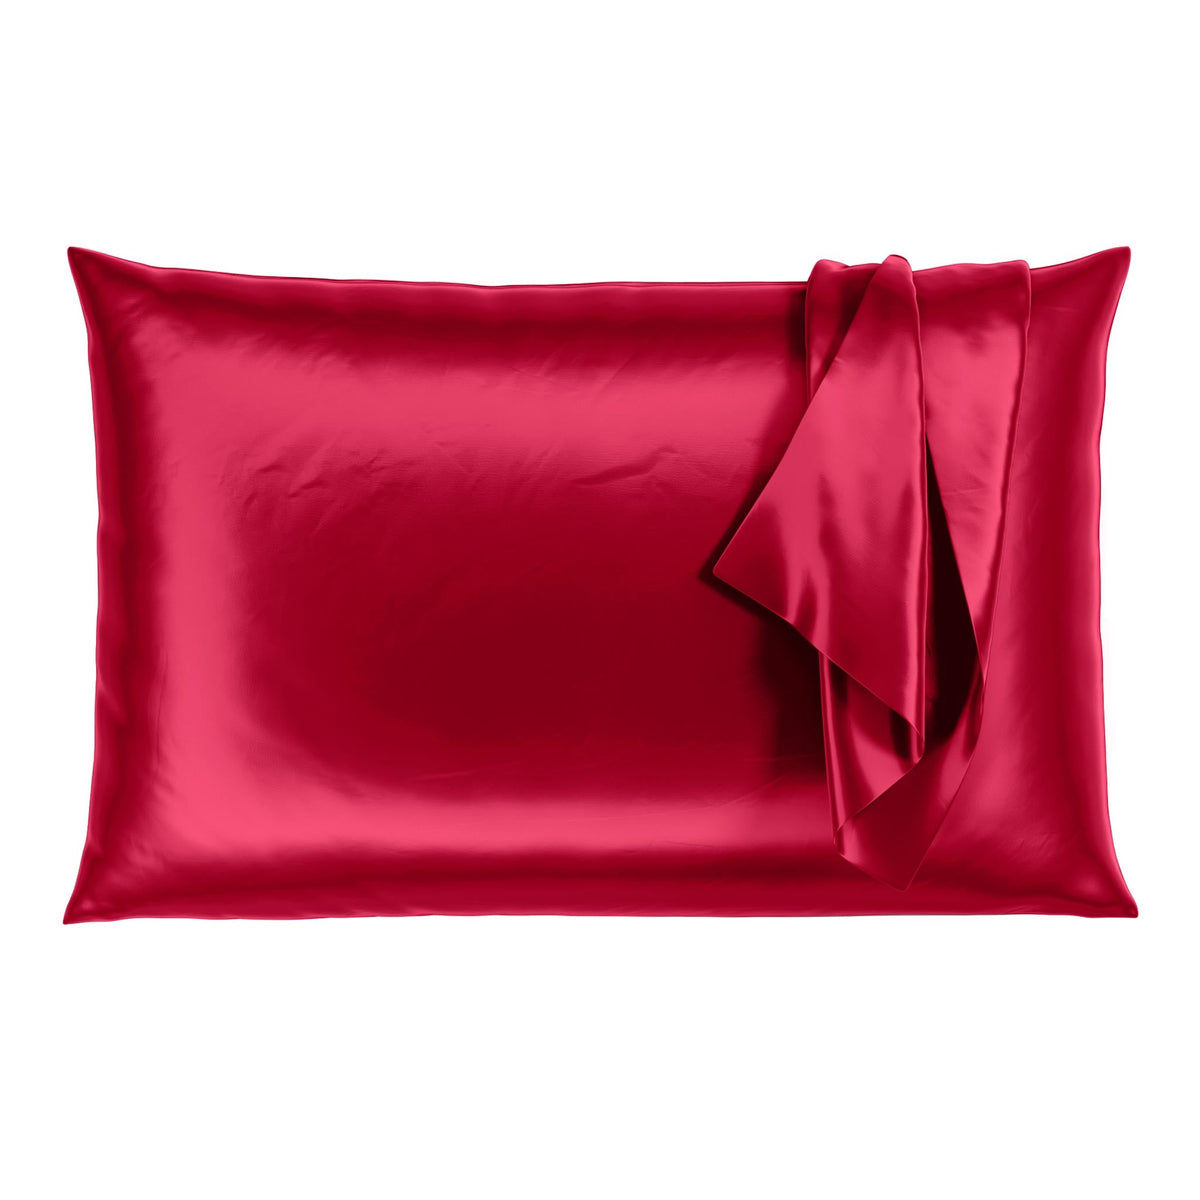 Mulberry Park Silks 30 Momme Pillowcase in Ruby